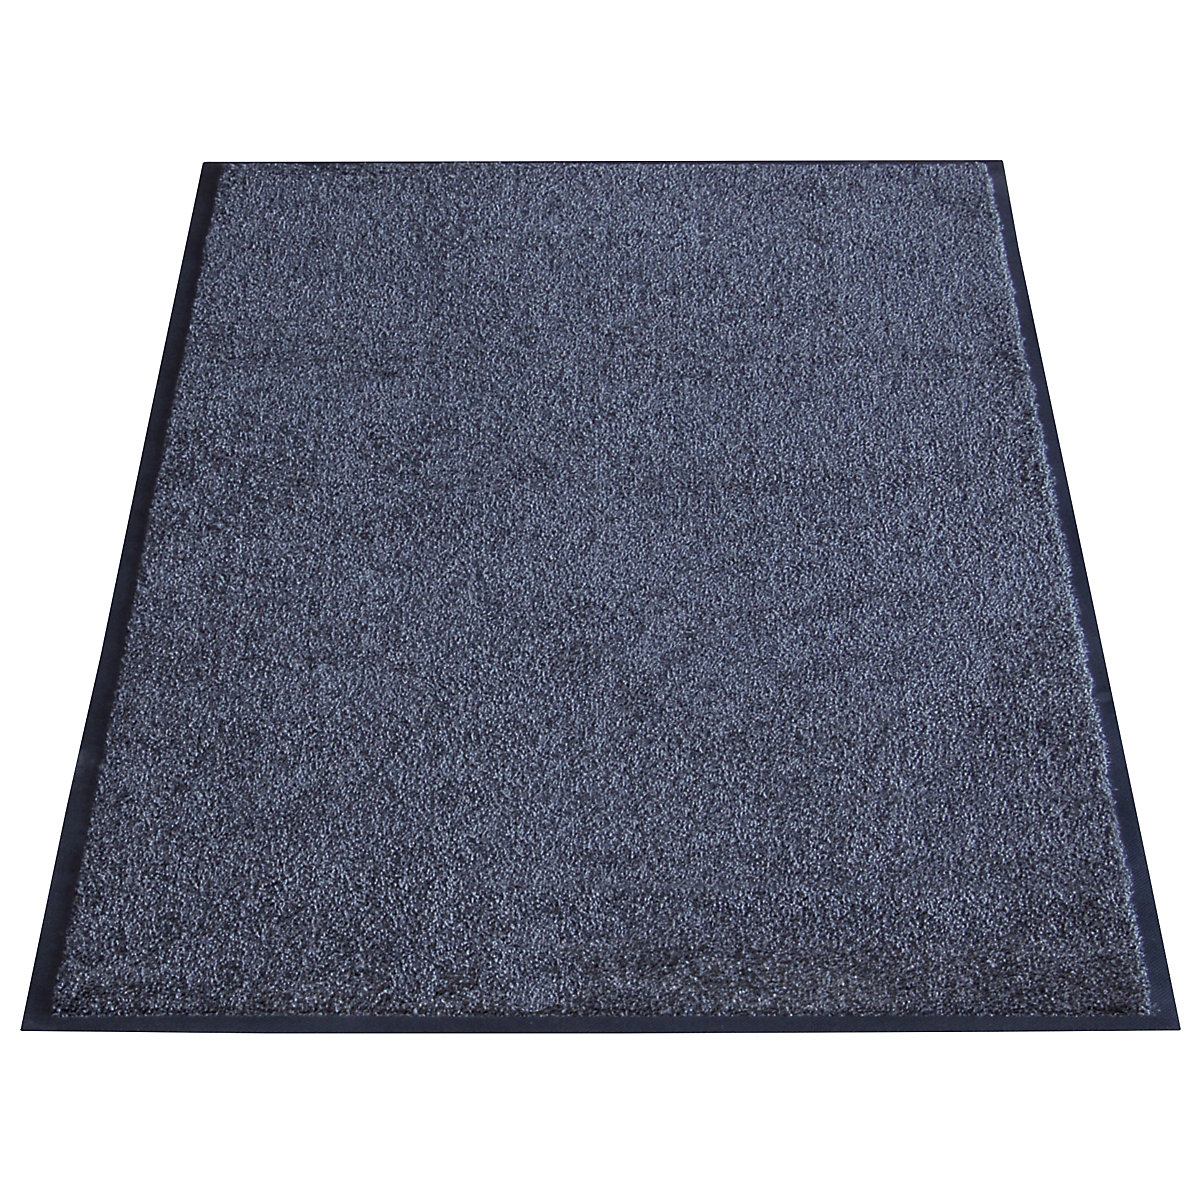 EAZYCARE WASH entrance matting, LxW 1500 x 850 mm, charcoal